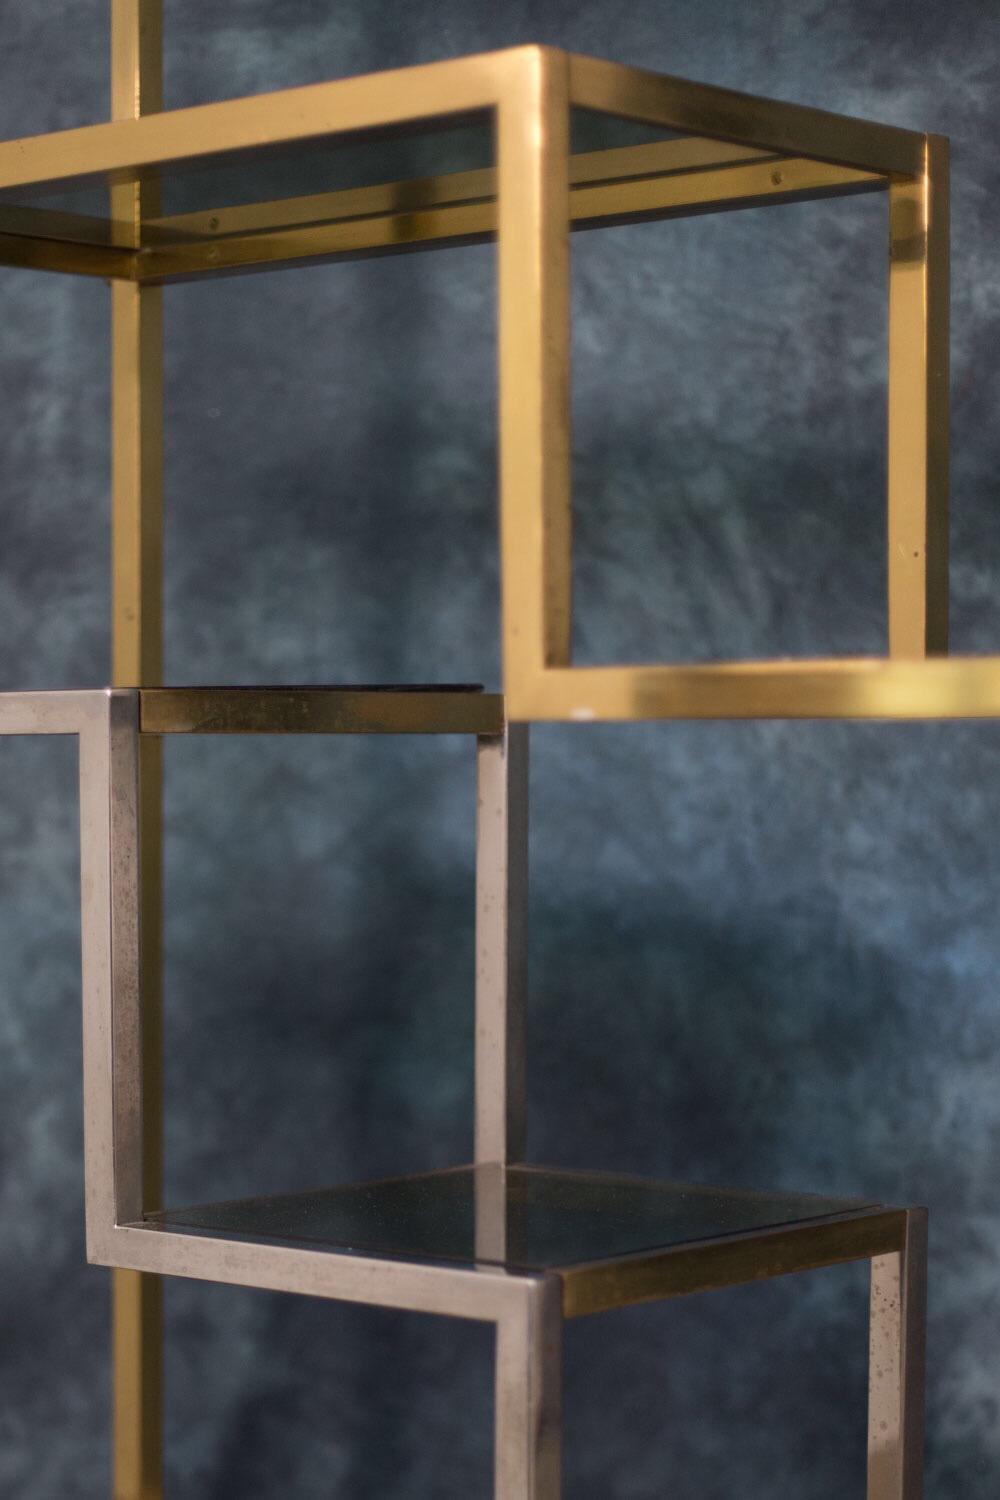 Romeo Rega designed and made this brass étagère in the early 1970s.
It features the beautiful detail of a structure made of gold, and chromed brass shelves.
The shelf shape was designed for optimal capacity.
The structure rests on a black